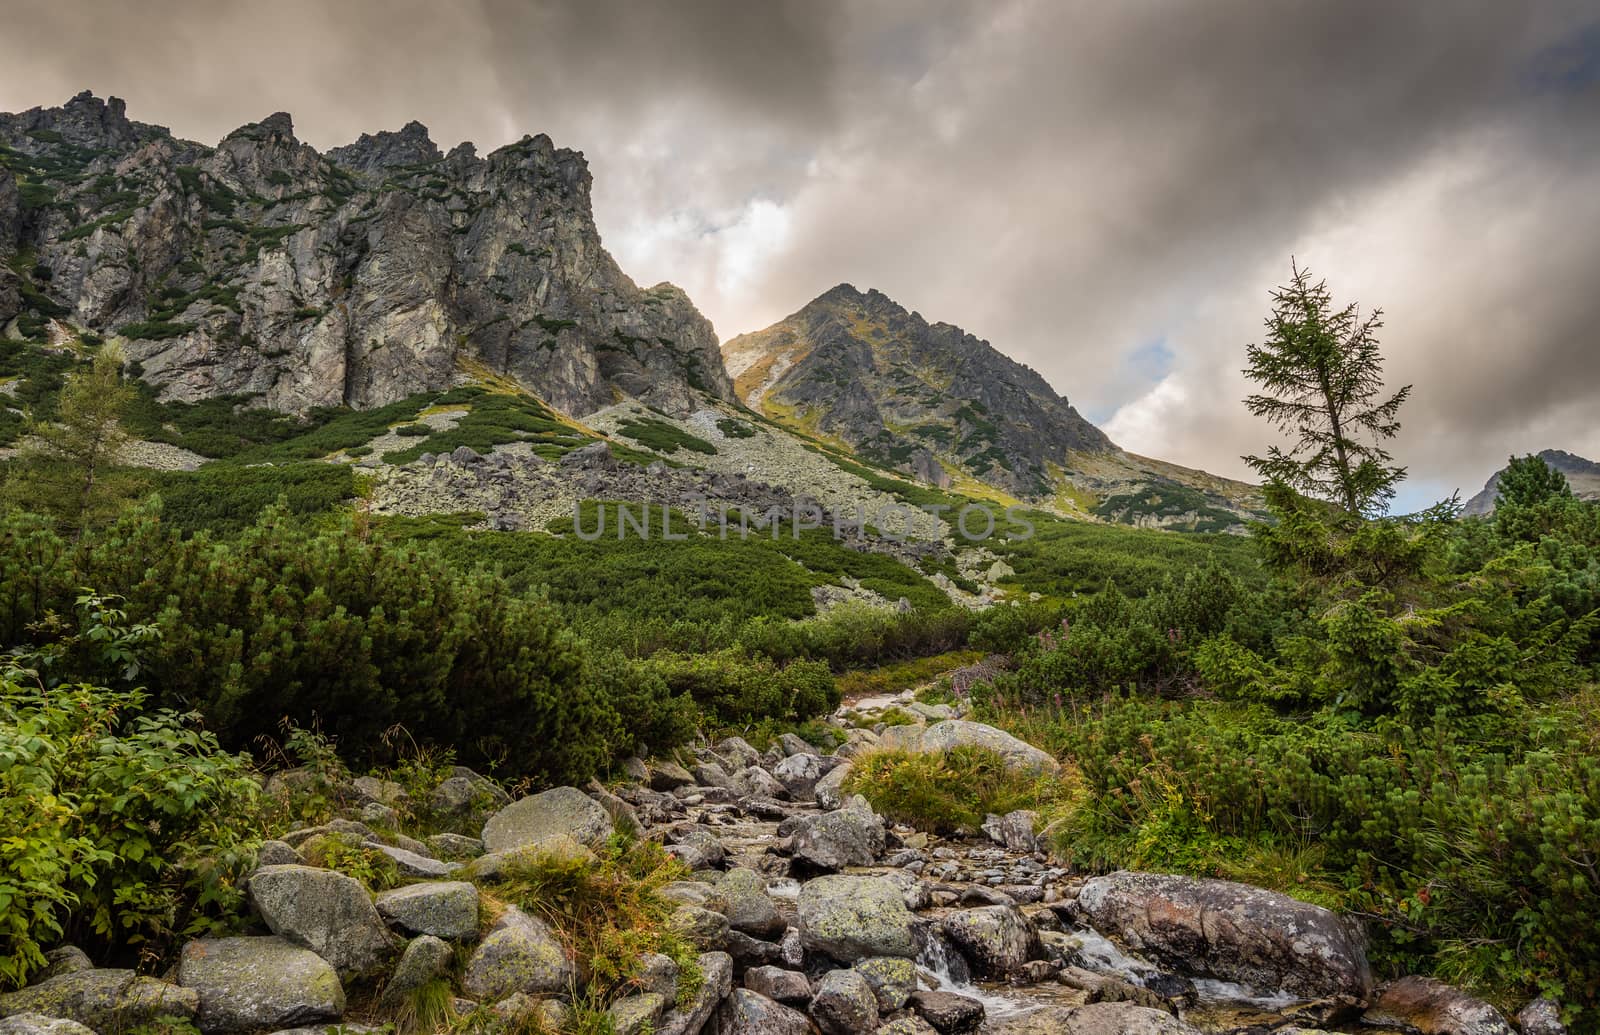 Mountain Landscape with a Creek and Rocks in Foreground on Cloudy Day. Mlynicka Valley, High Tatra, Slovakia.